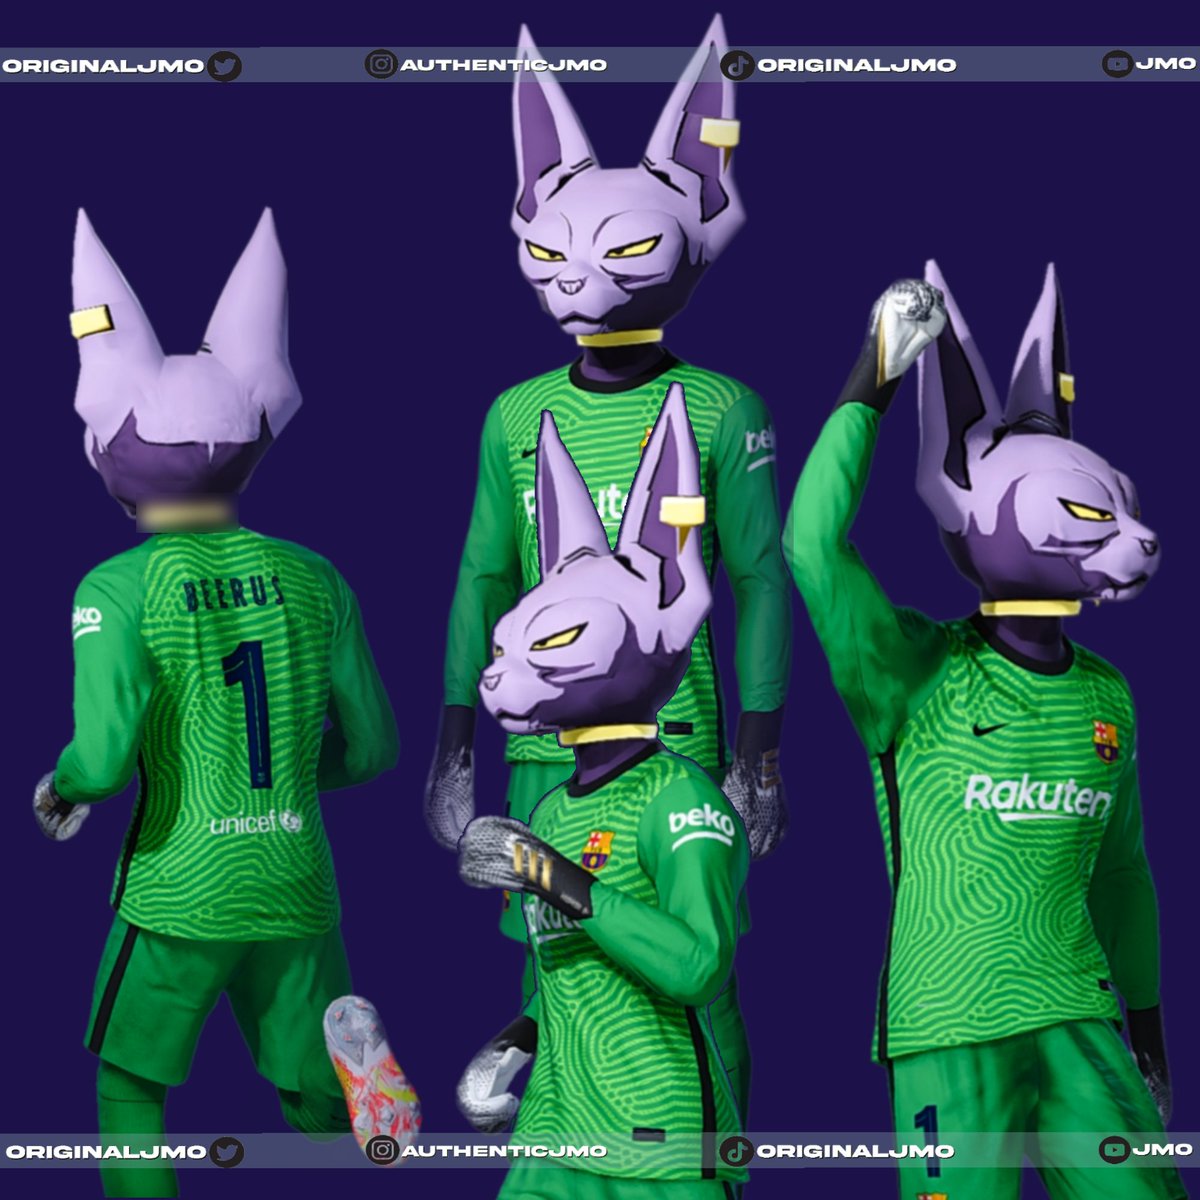 Beerus Preview
My First DragonBall Character for #efootballpes2021